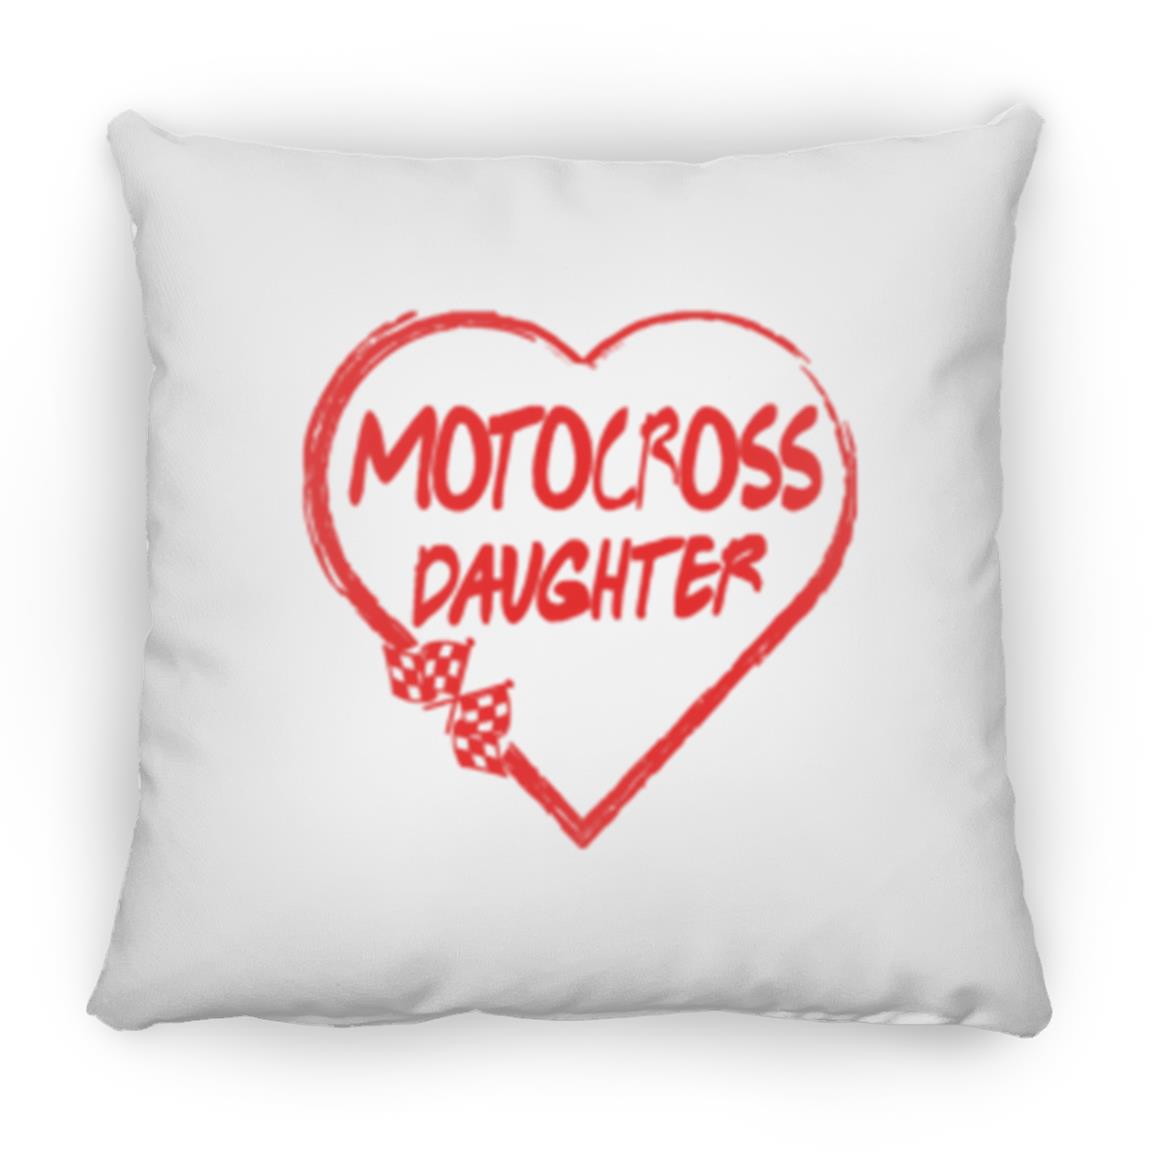 Motocross Daughter Heart Large Square Pillow